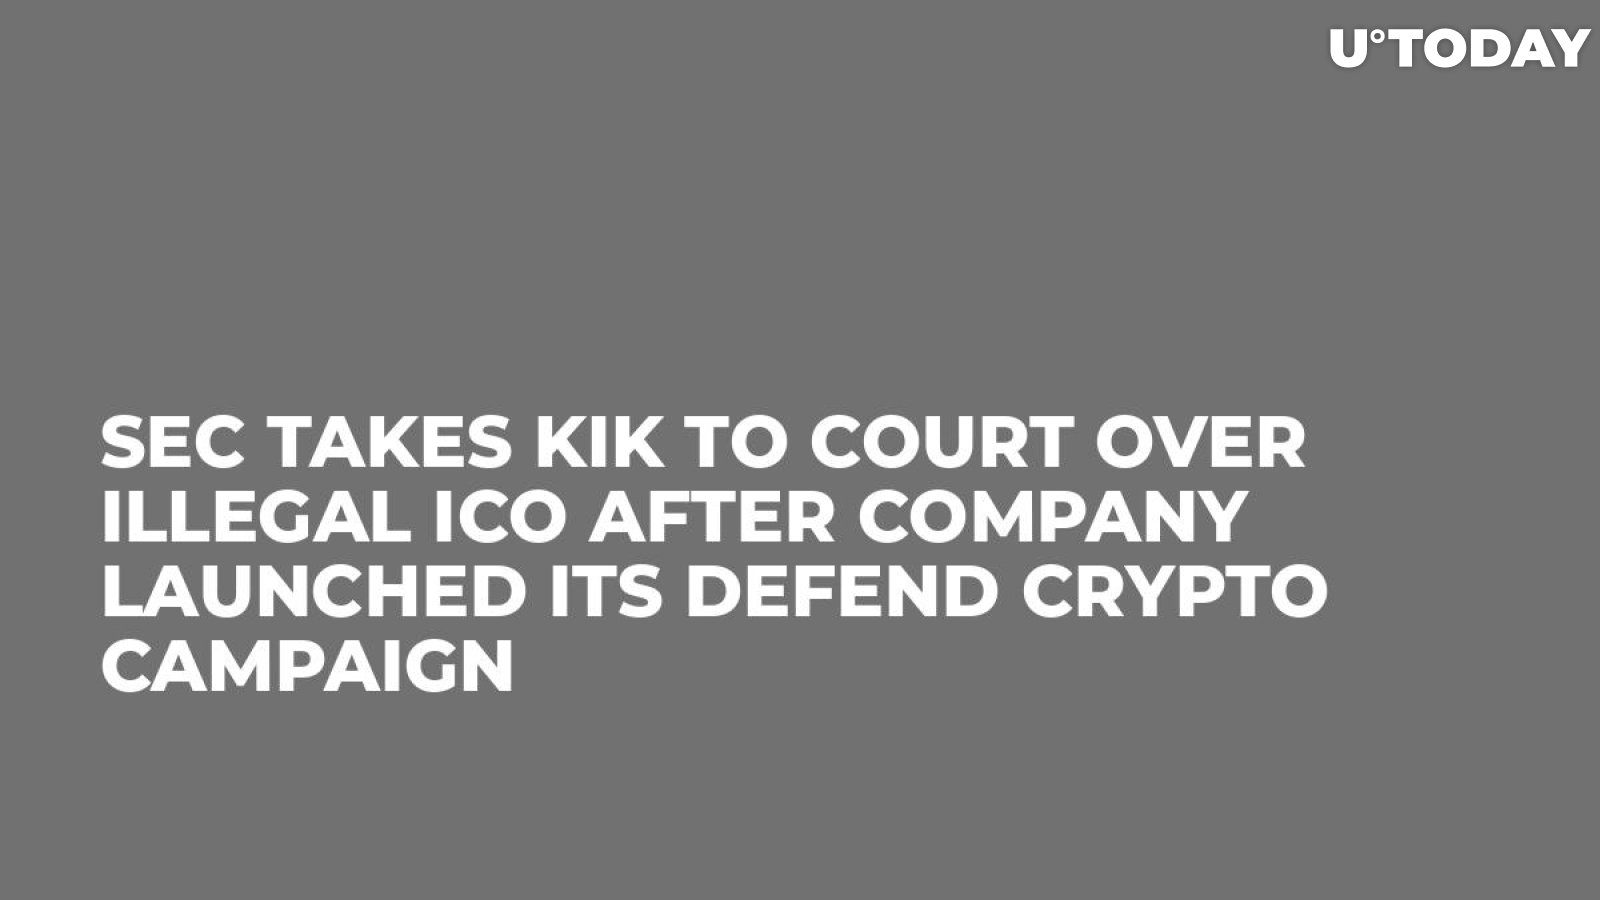 SEC Takes Kik to Court over Illegal ICO After Company Launched Its Defend Crypto Campaign